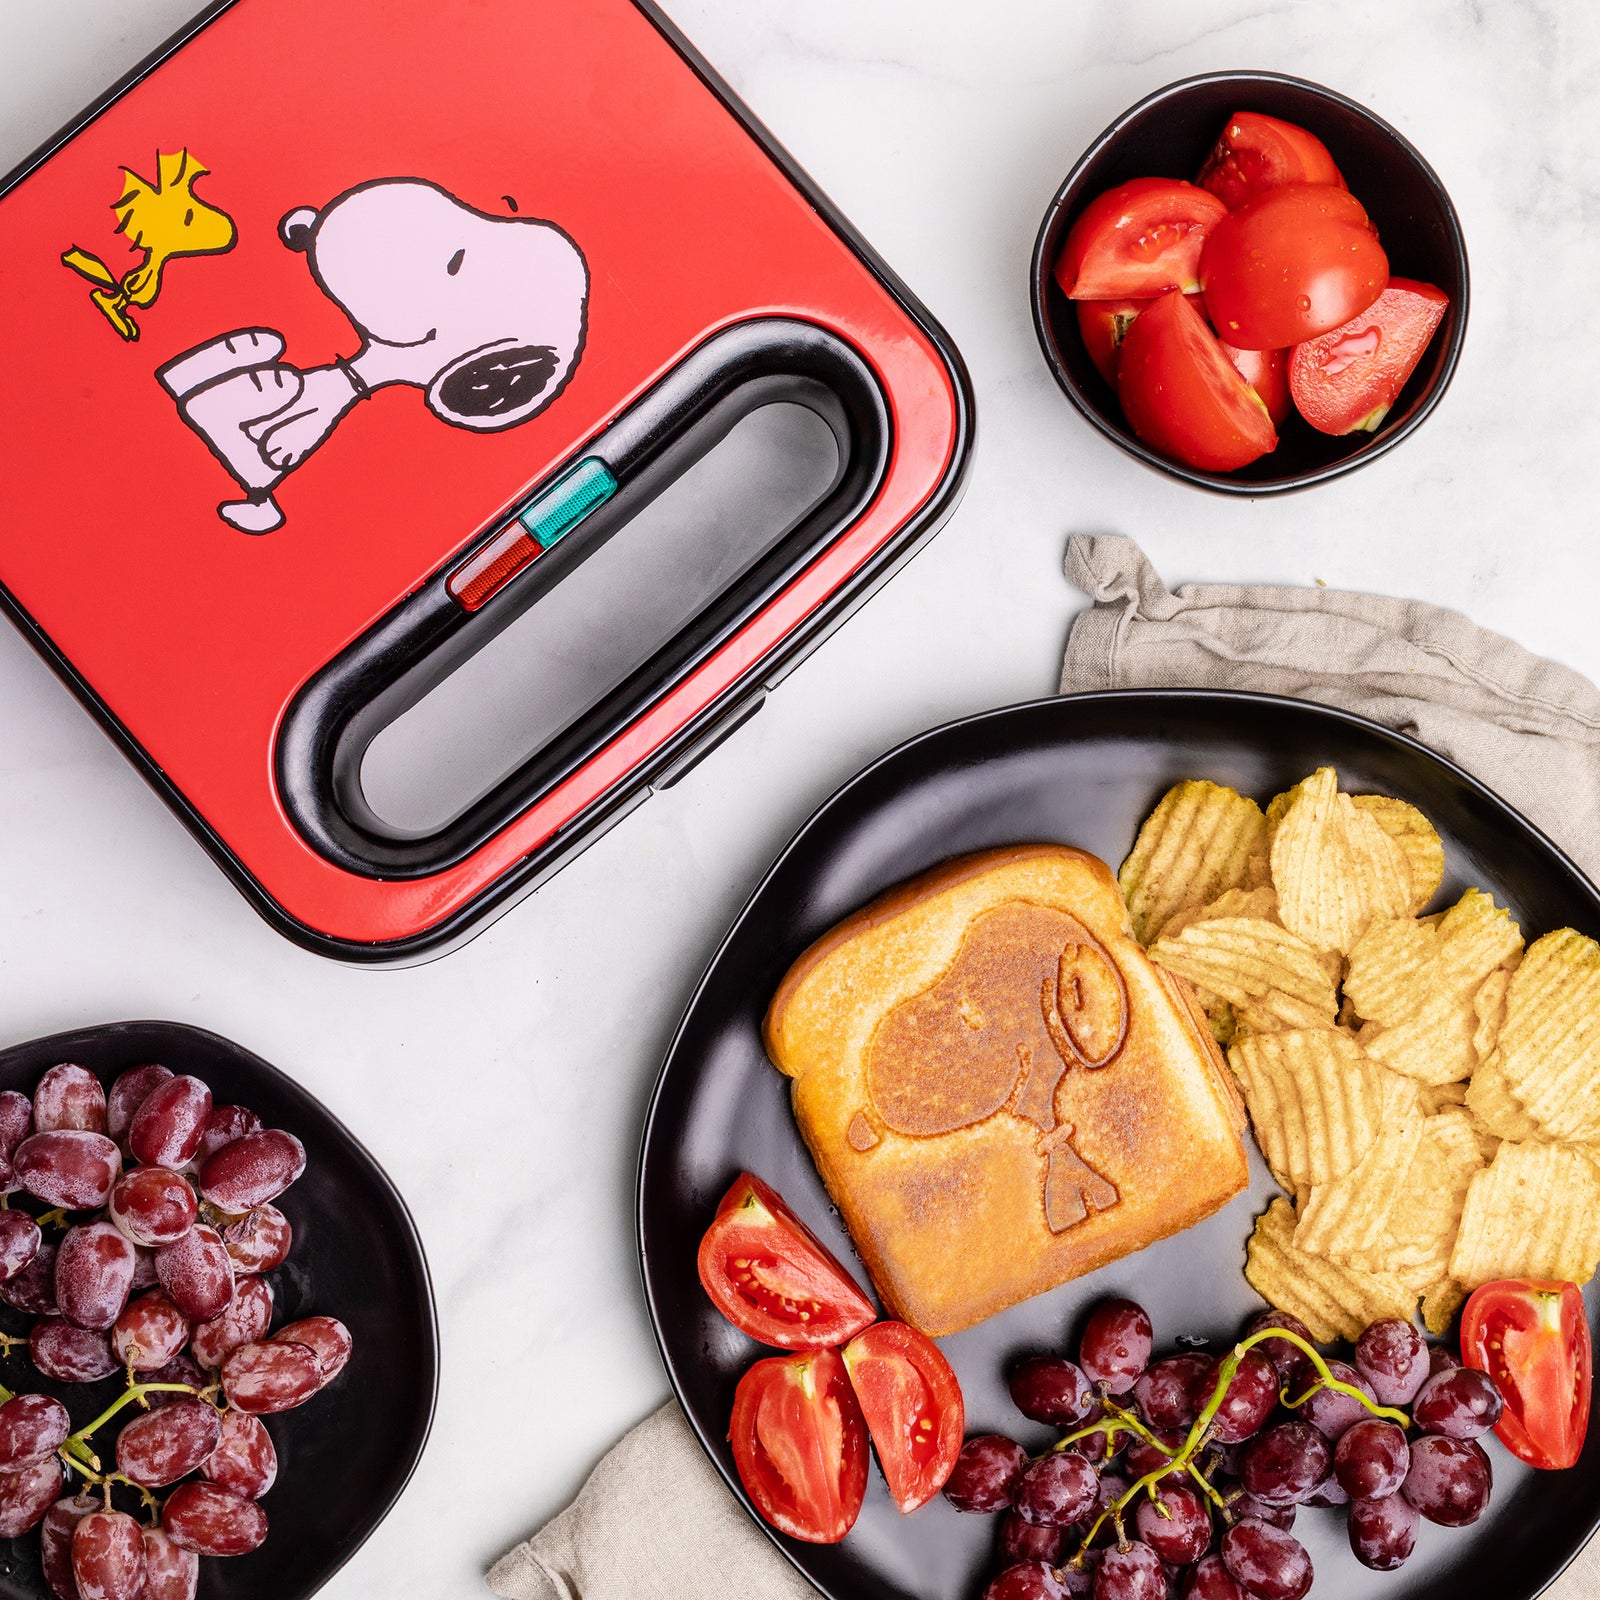 Uncanny Brands Peanuts Snoopy Two-Slice Toaster- Toasts Your Favorite  Beagle On Your Toast